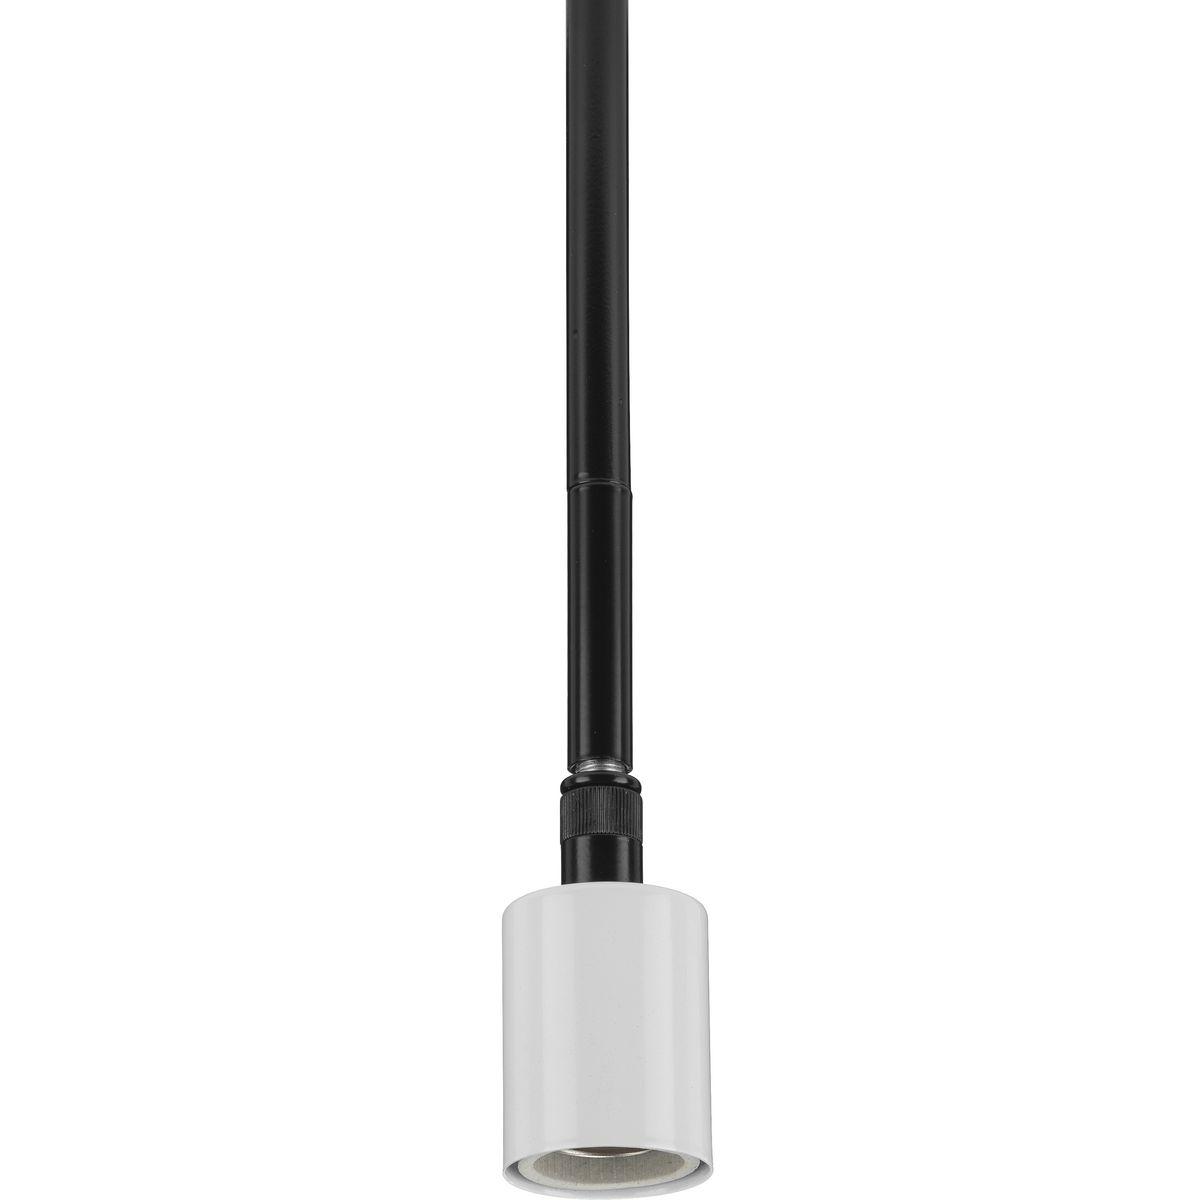 Hubbell P5198-31 This versatile modular pendant stem kit system will help to make installation simple. The stem kit allows you to customize lighting to perfectly fit the personality of your home. A black finish coats this pendant stem kit system.  ; Customize lighting to 